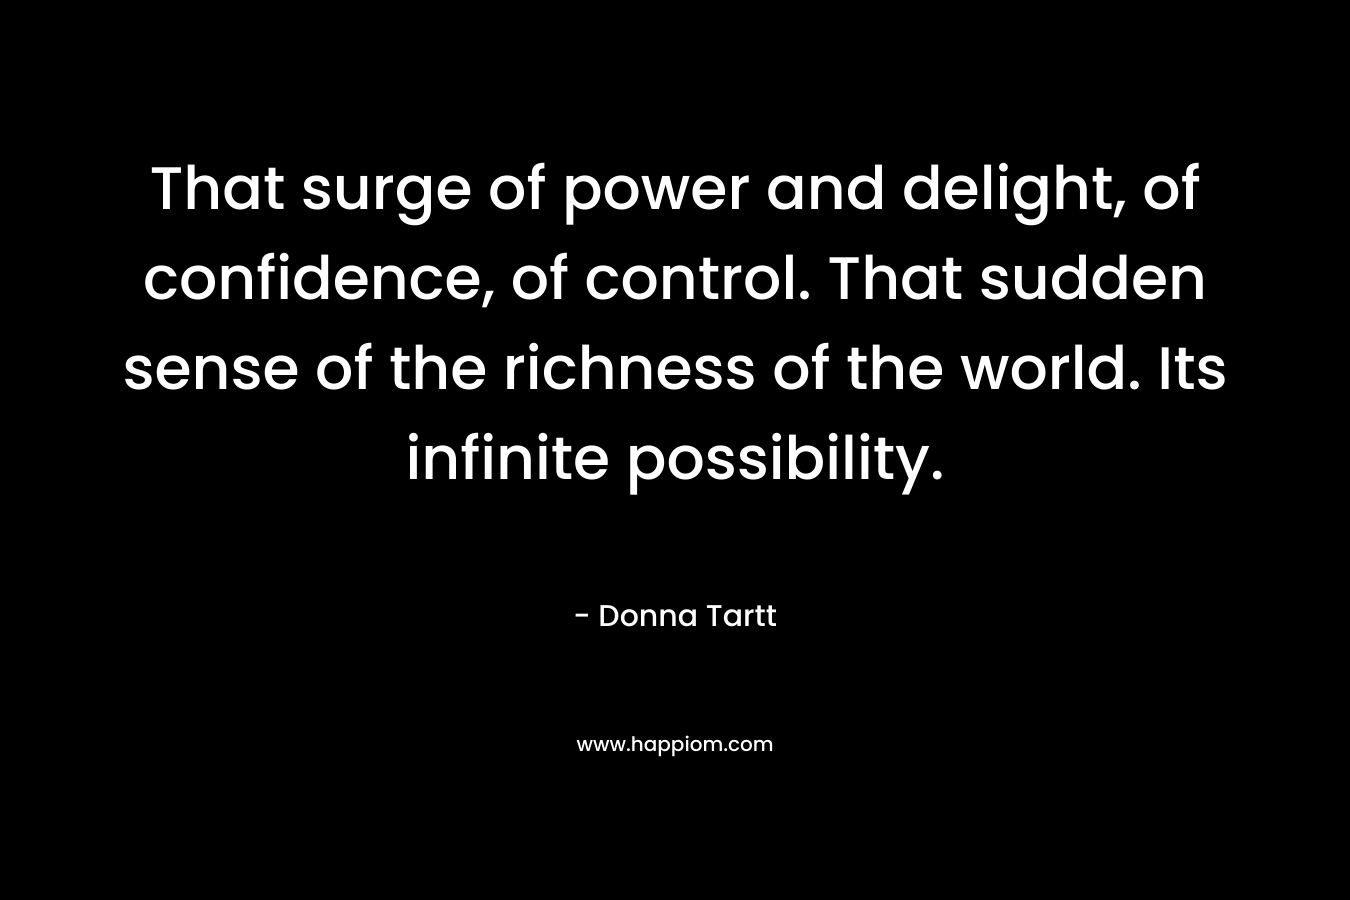 That surge of power and delight, of confidence, of control. That sudden sense of the richness of the world. Its infinite possibility.